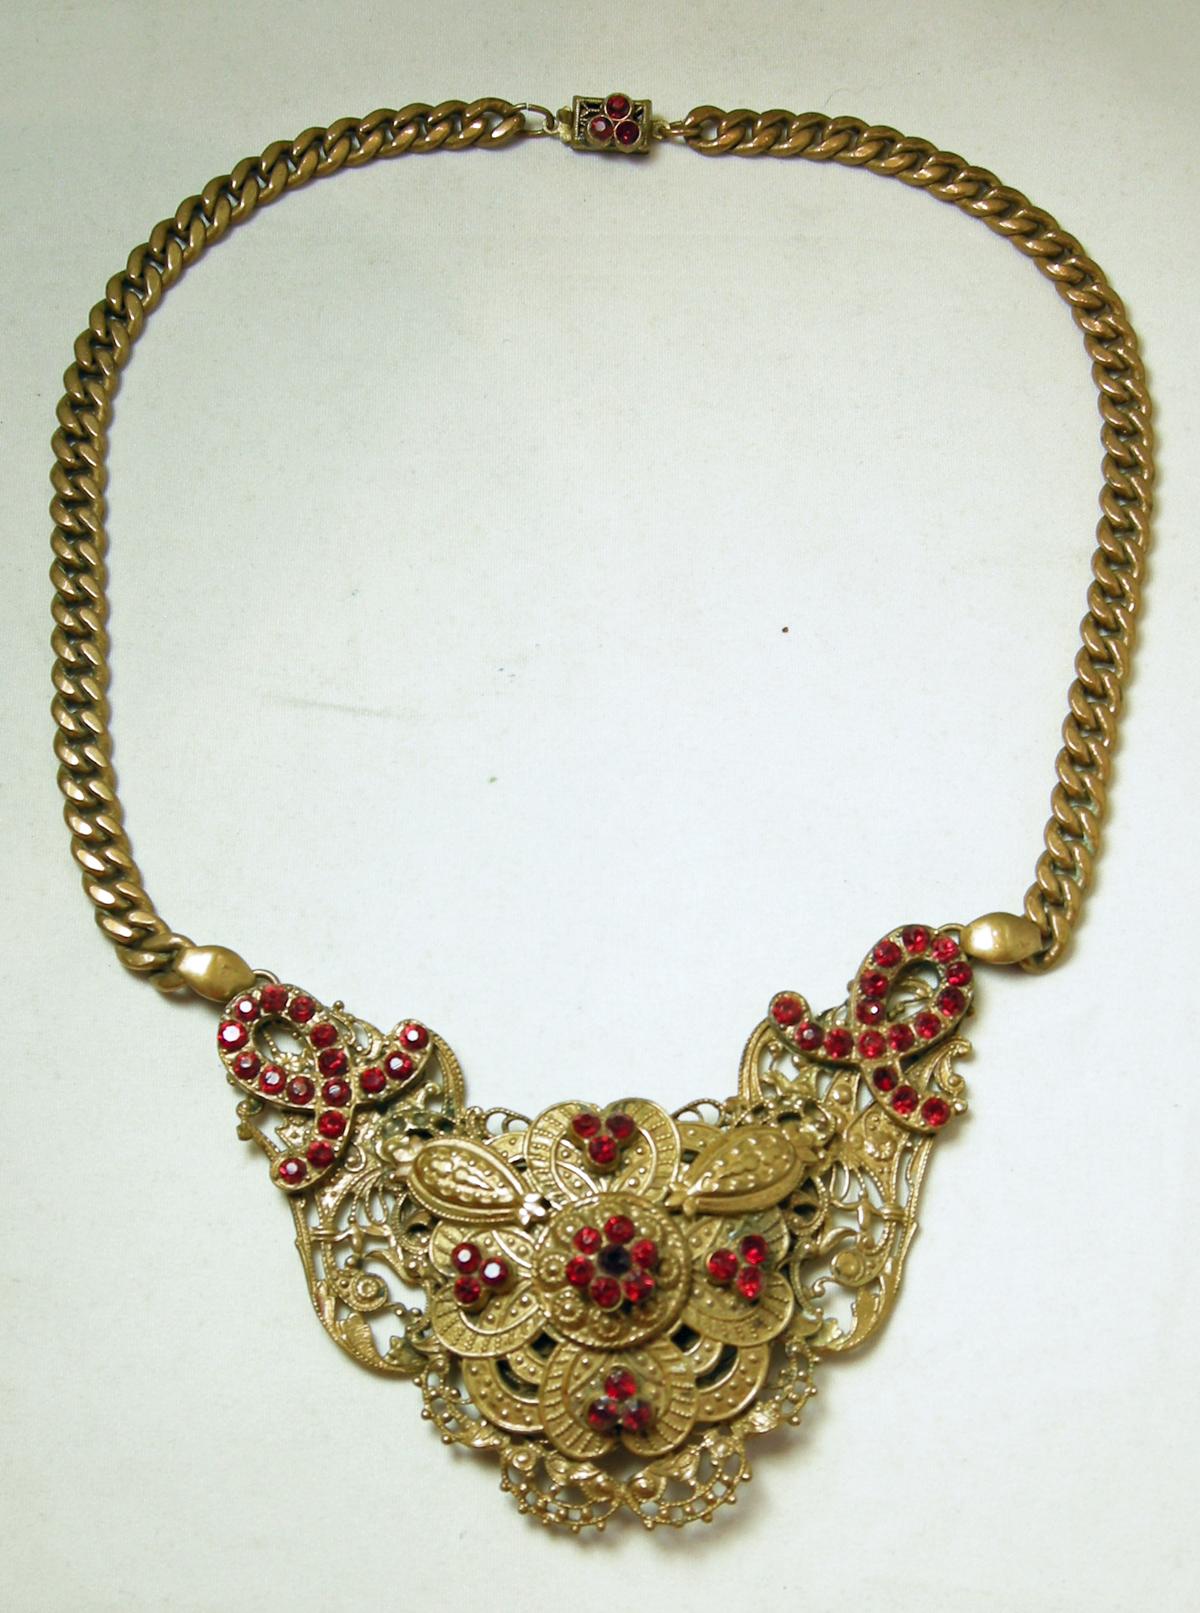 It’s getting harder to find necklaces like this because collectors don’t want to let them go.  It has a 3-dimensional centerpiece with a floral design with red crystals.  It has a heavy link chain with a slide in clasp.  It is 15” and the